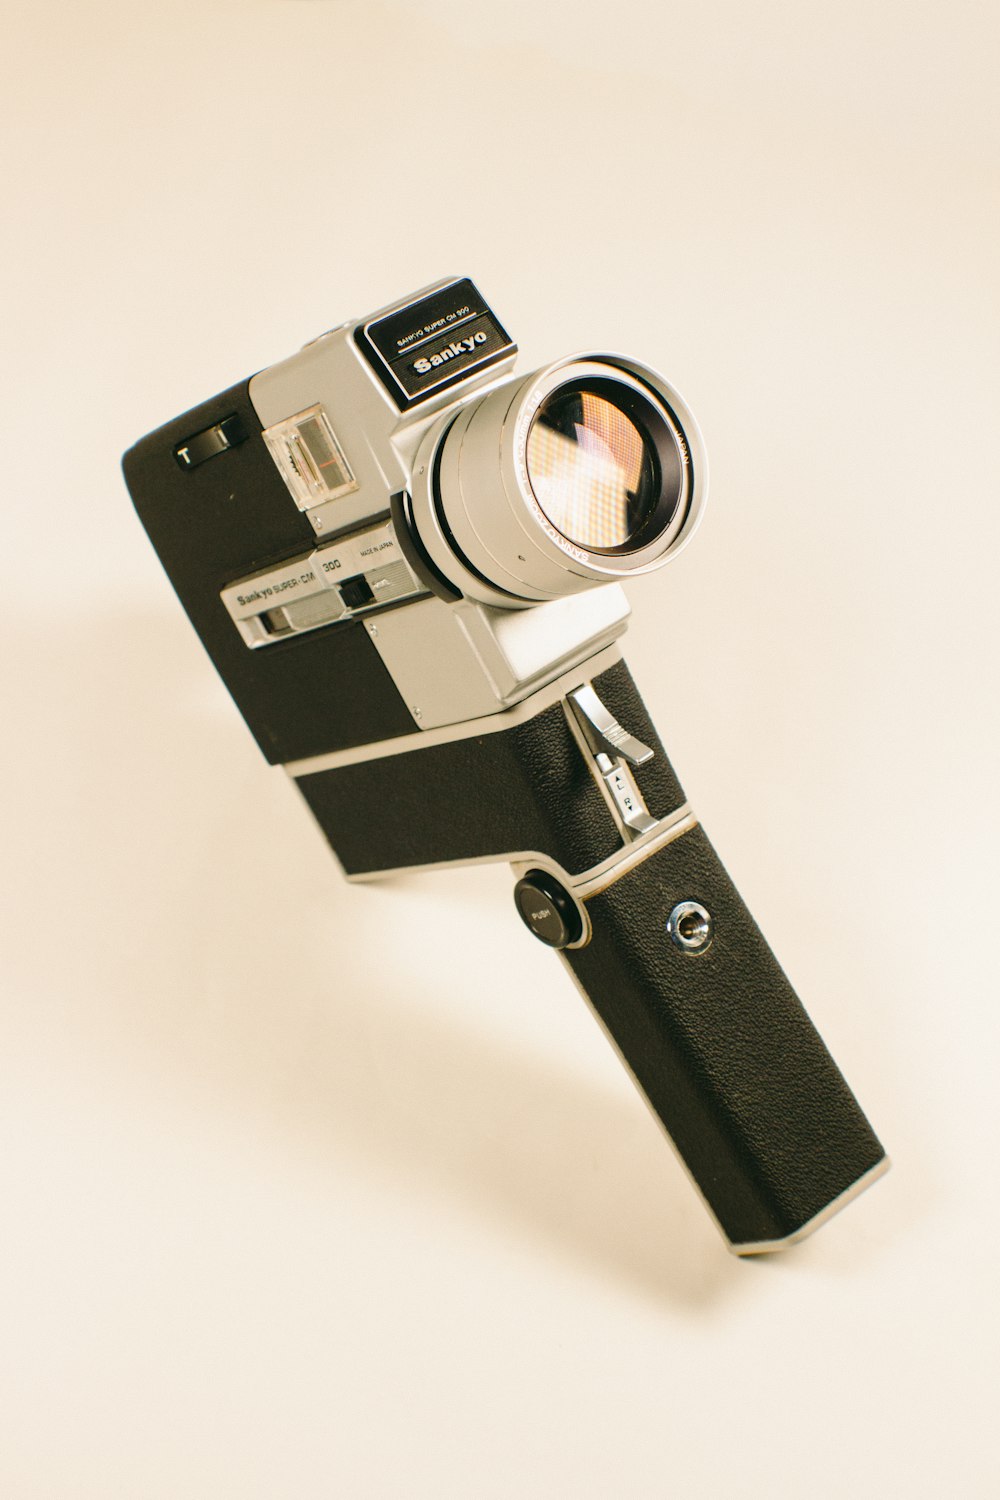 black and silver camera on white surface